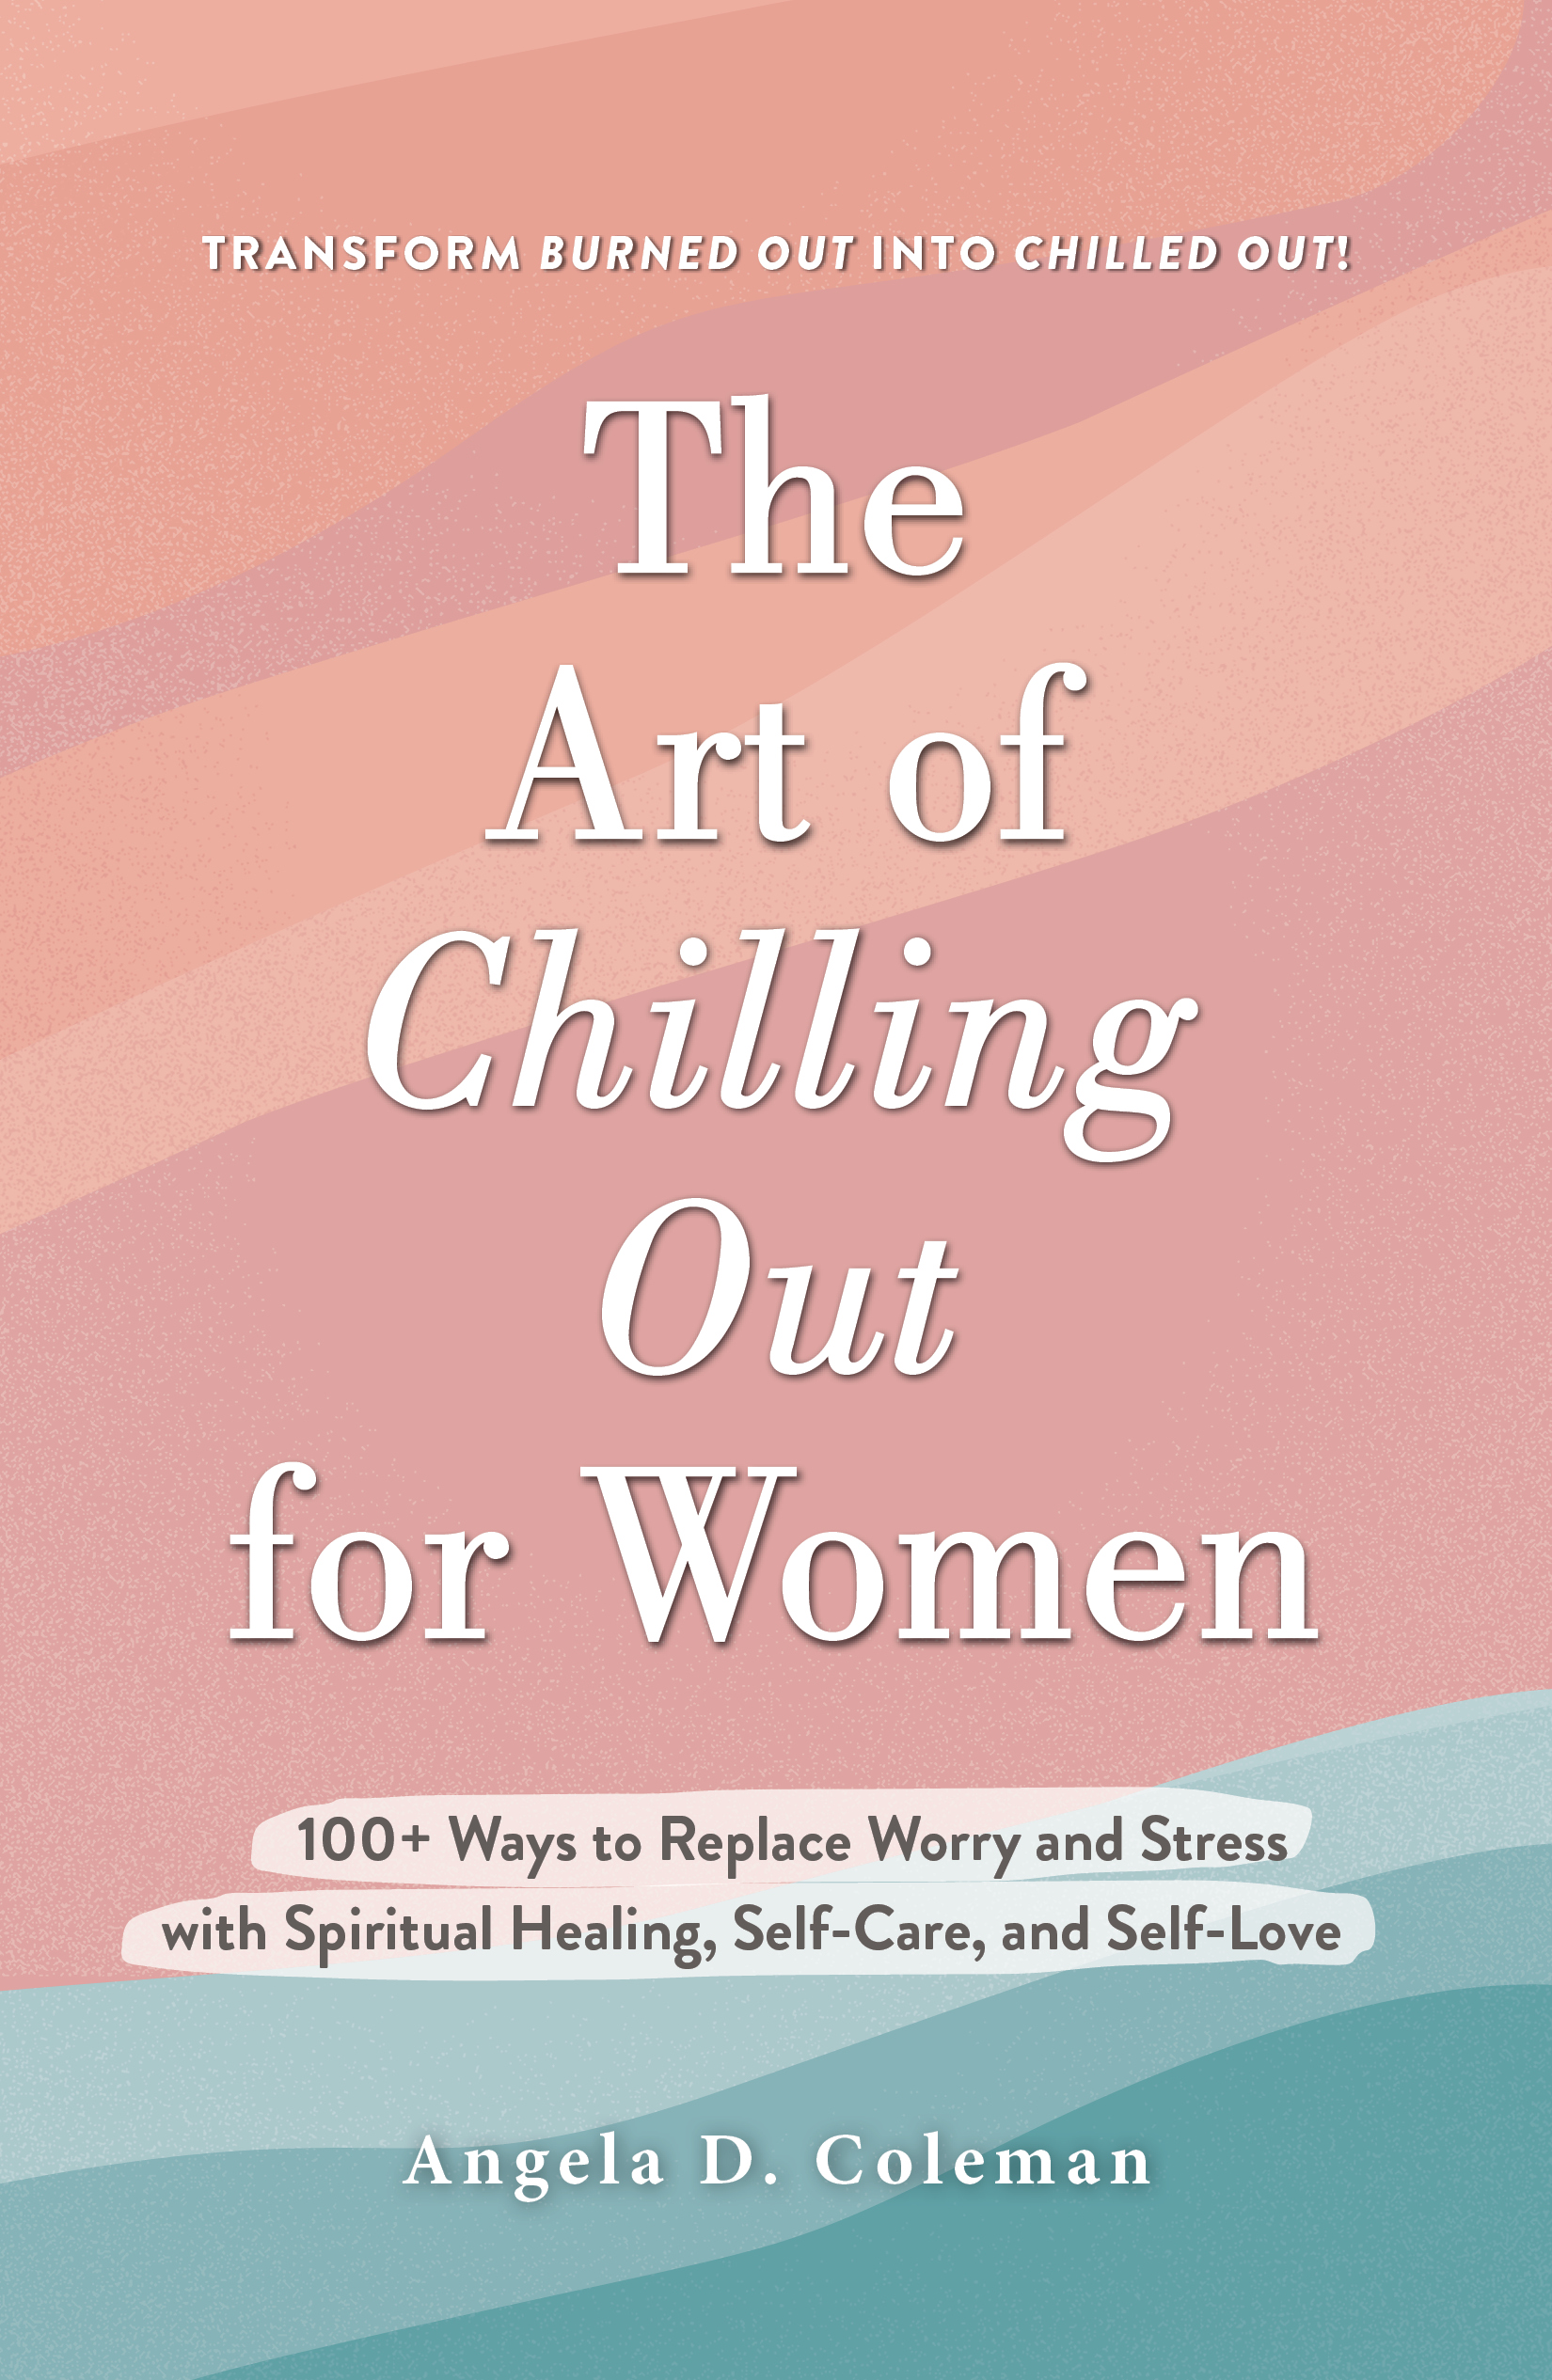 The Art of Chilling Out for Women book cover.